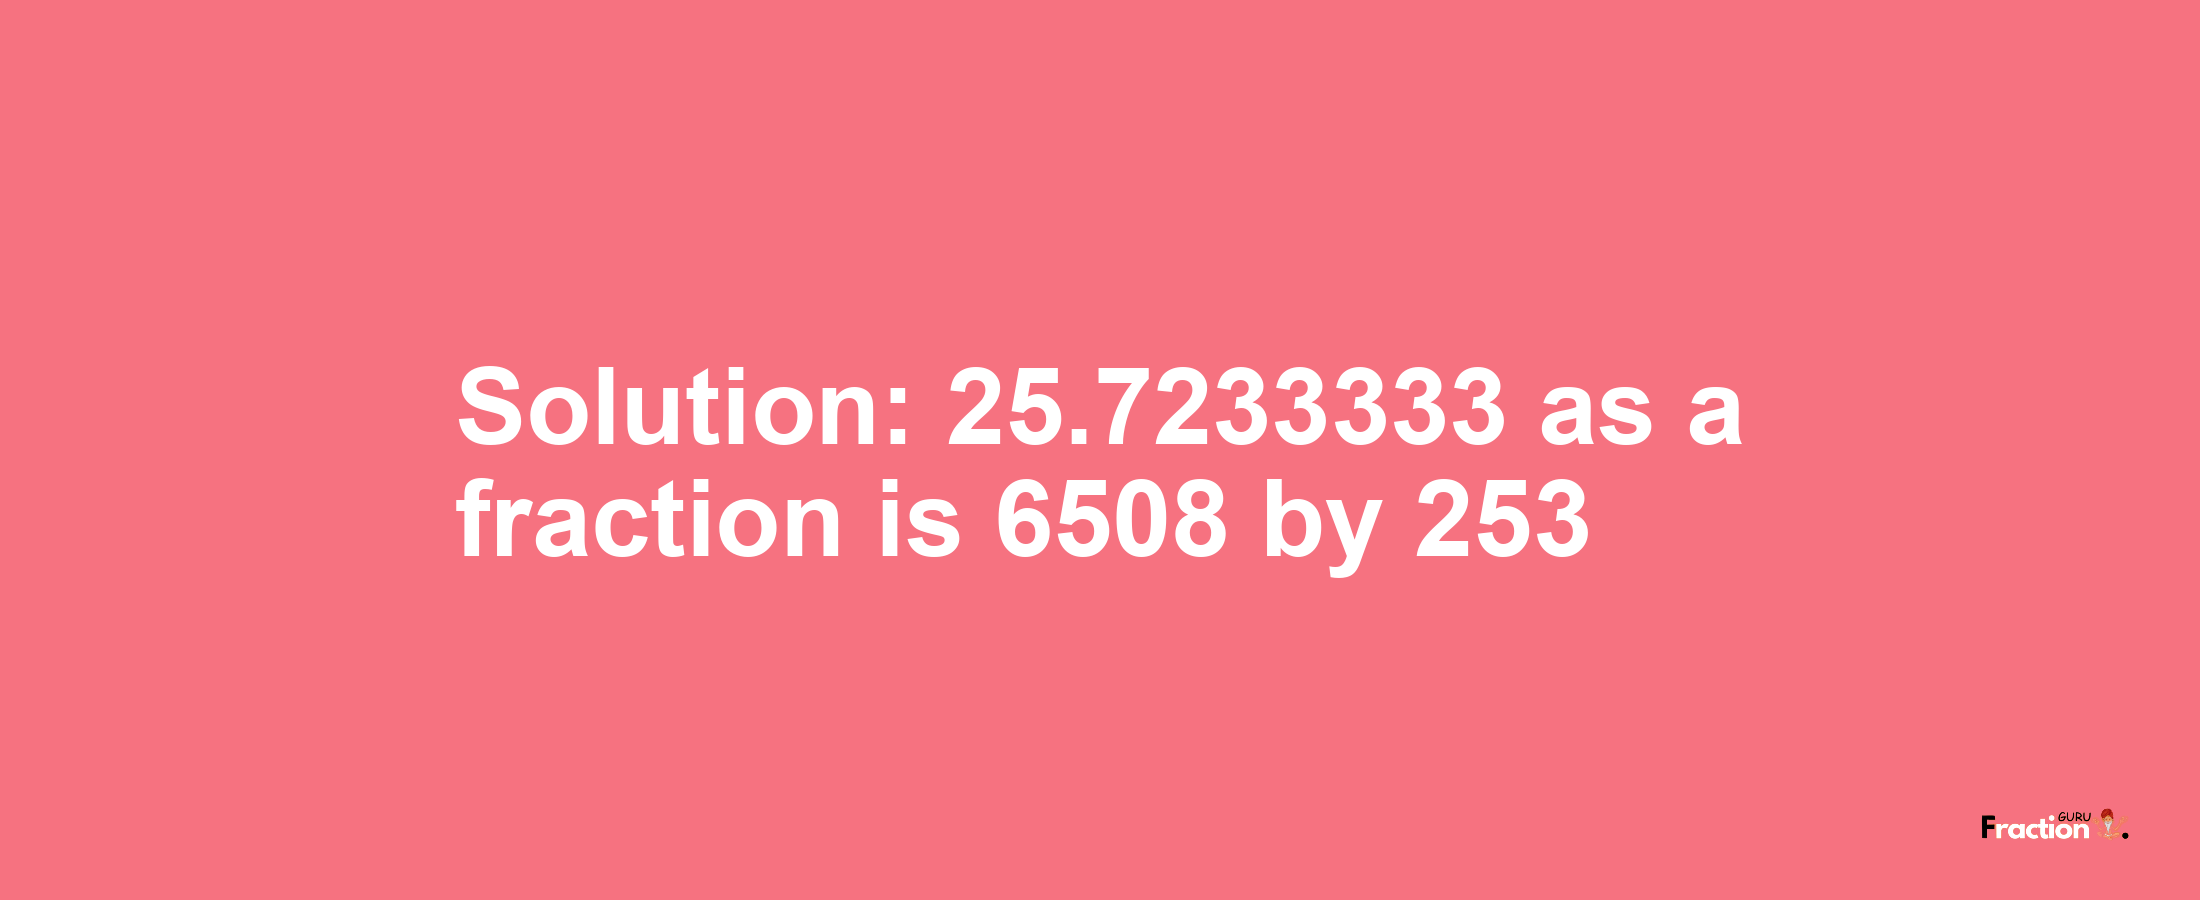 Solution:25.7233333 as a fraction is 6508/253